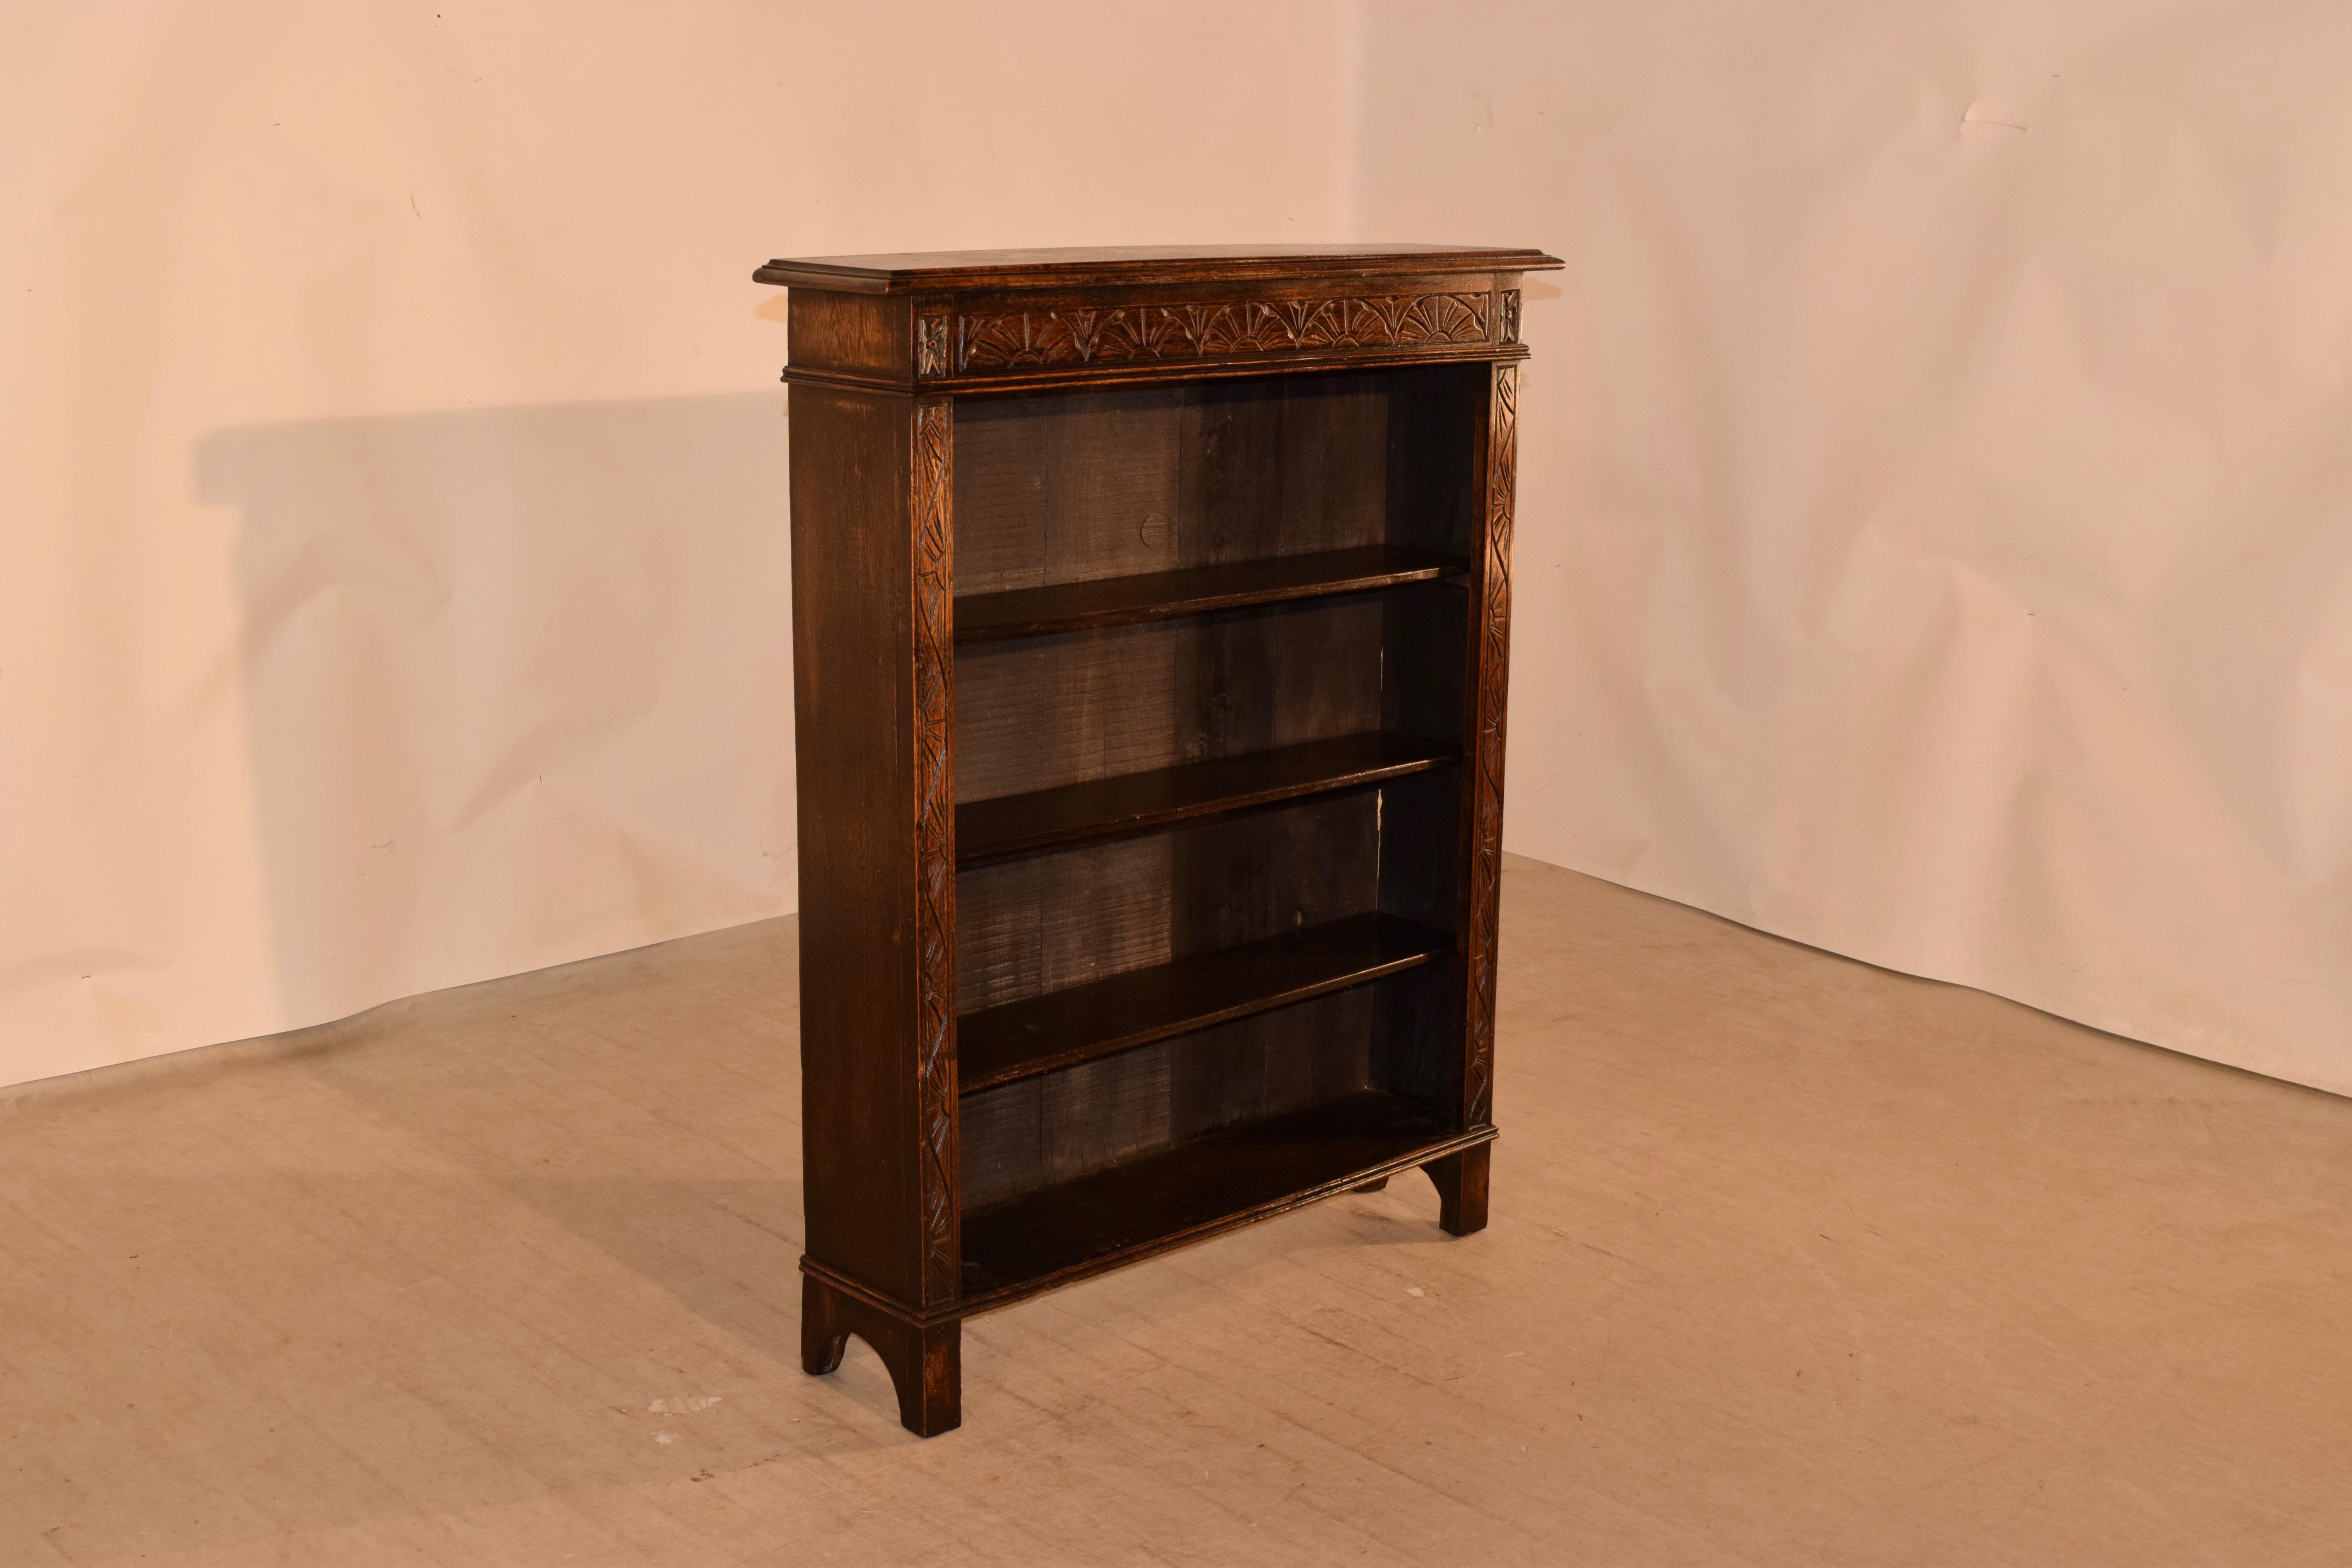 19th century oak bookcase from England with a beveled edge around the top. This follows down to a four shelves flanked by hand carved decorated face of the case and simple sides. The case is raised on bracket feet.